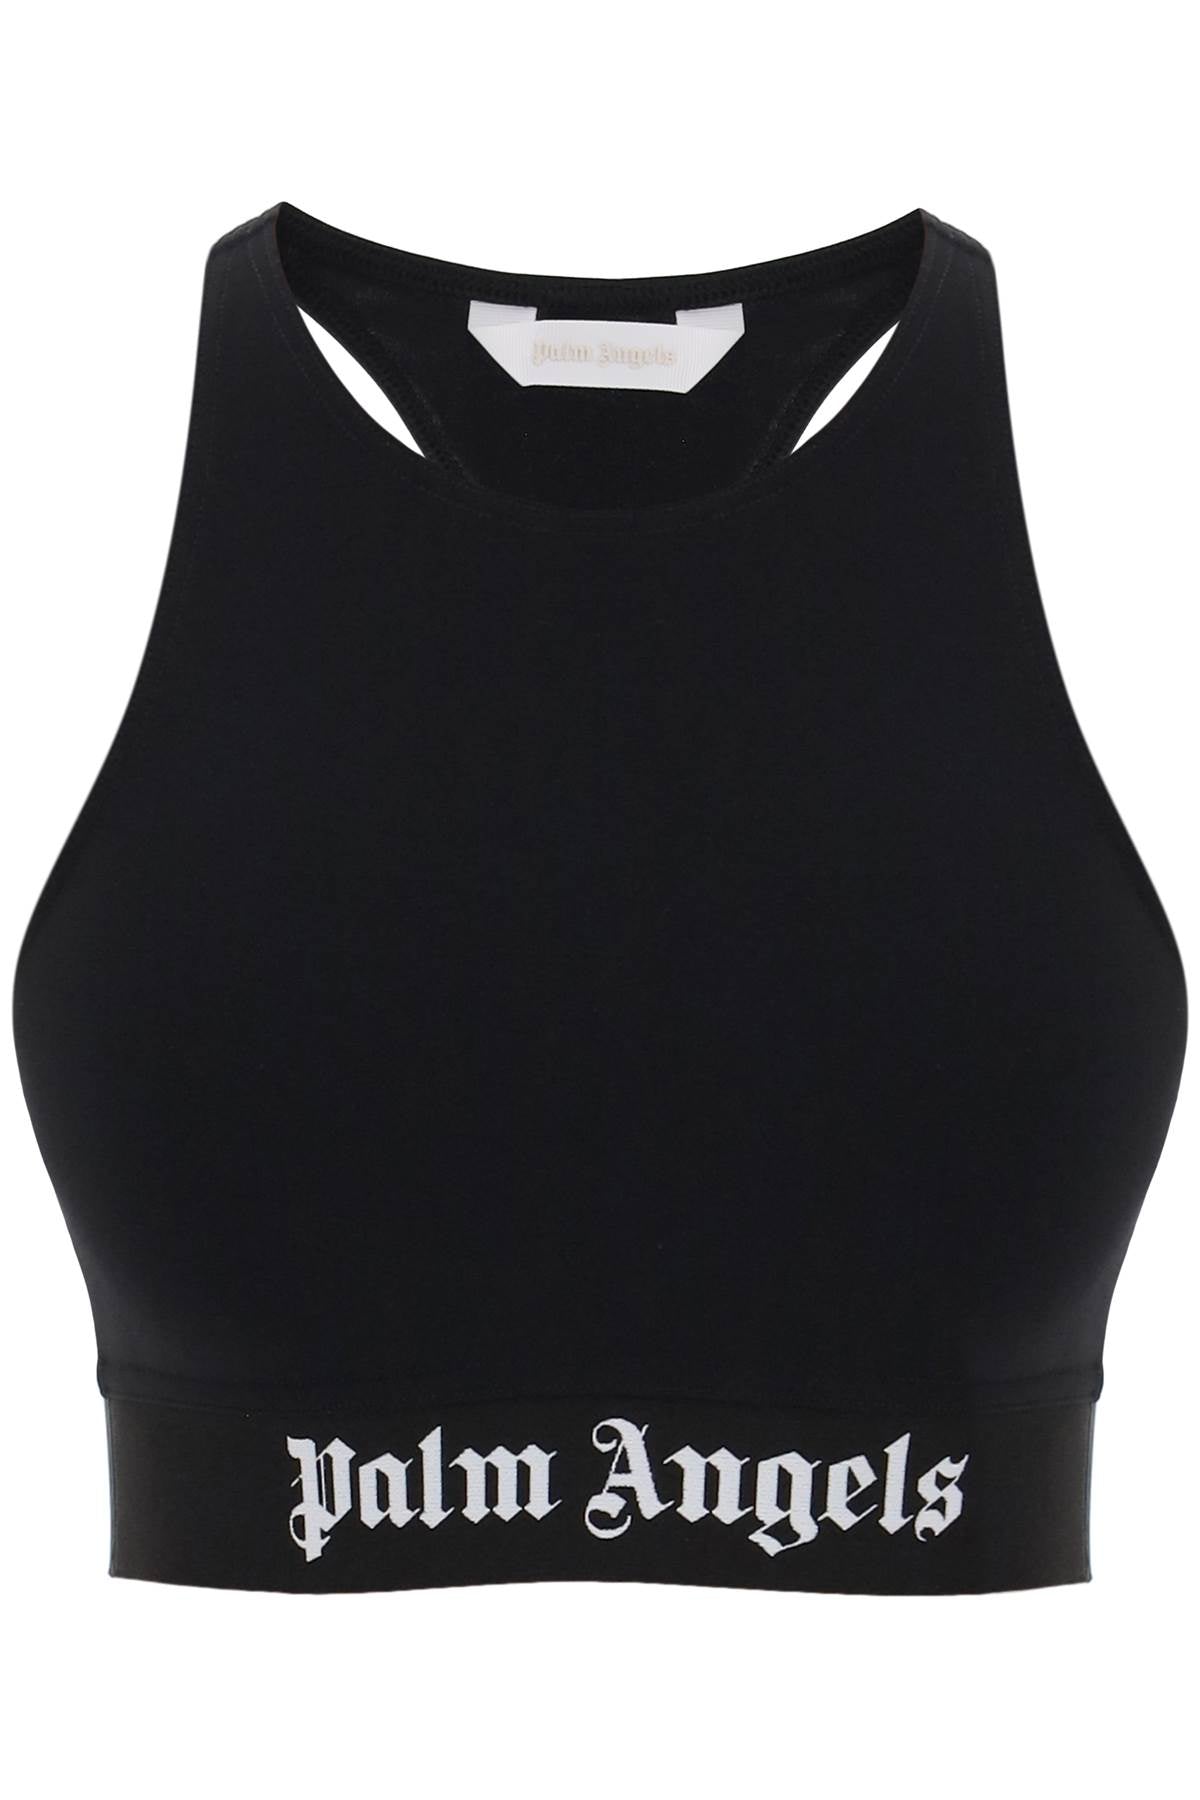 Palm angels "sport bra with branded band"-0